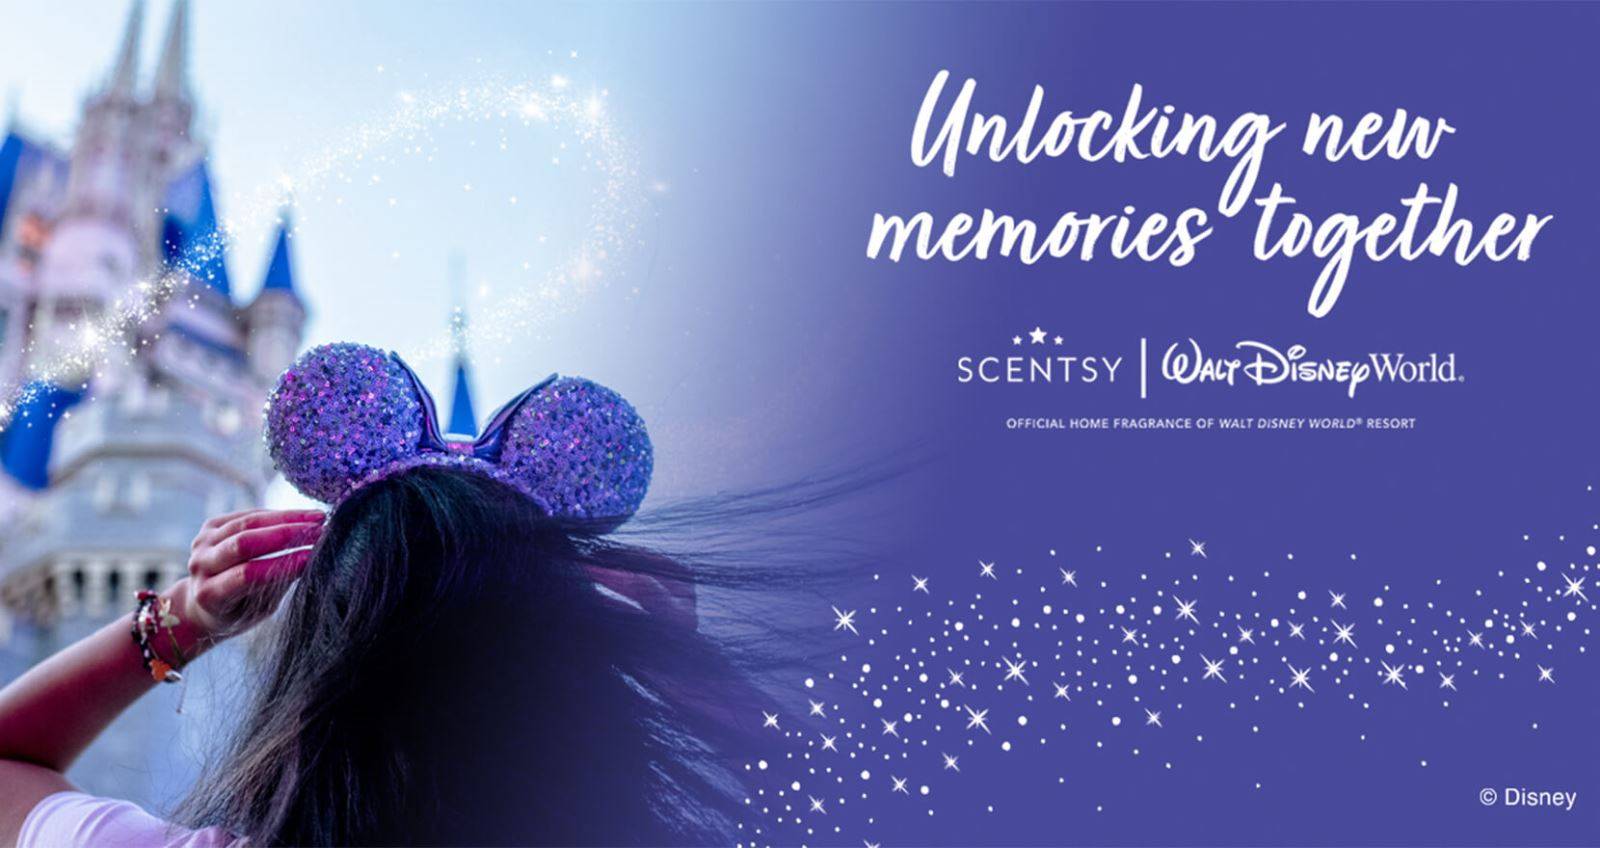 Something new coming to Fantasyland as Scentsy becomes the Official Home Fragrance of Walt Disney World Resort